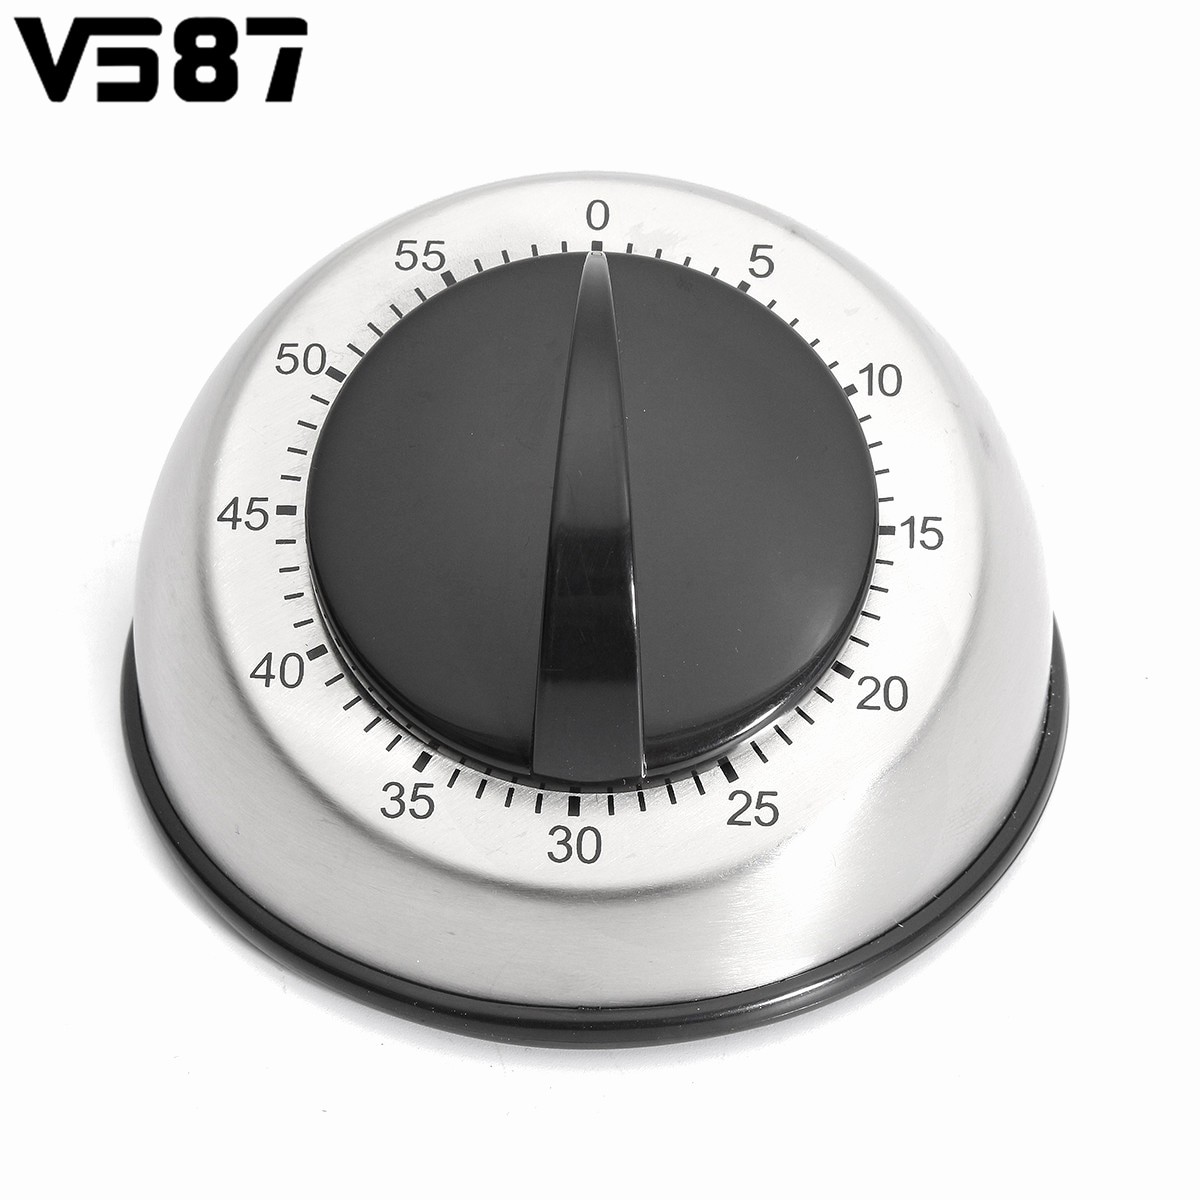 A Timer for 1 Minutes Awesome Stainless Steel Dome Shape Kitchen Timer 60 Minutes